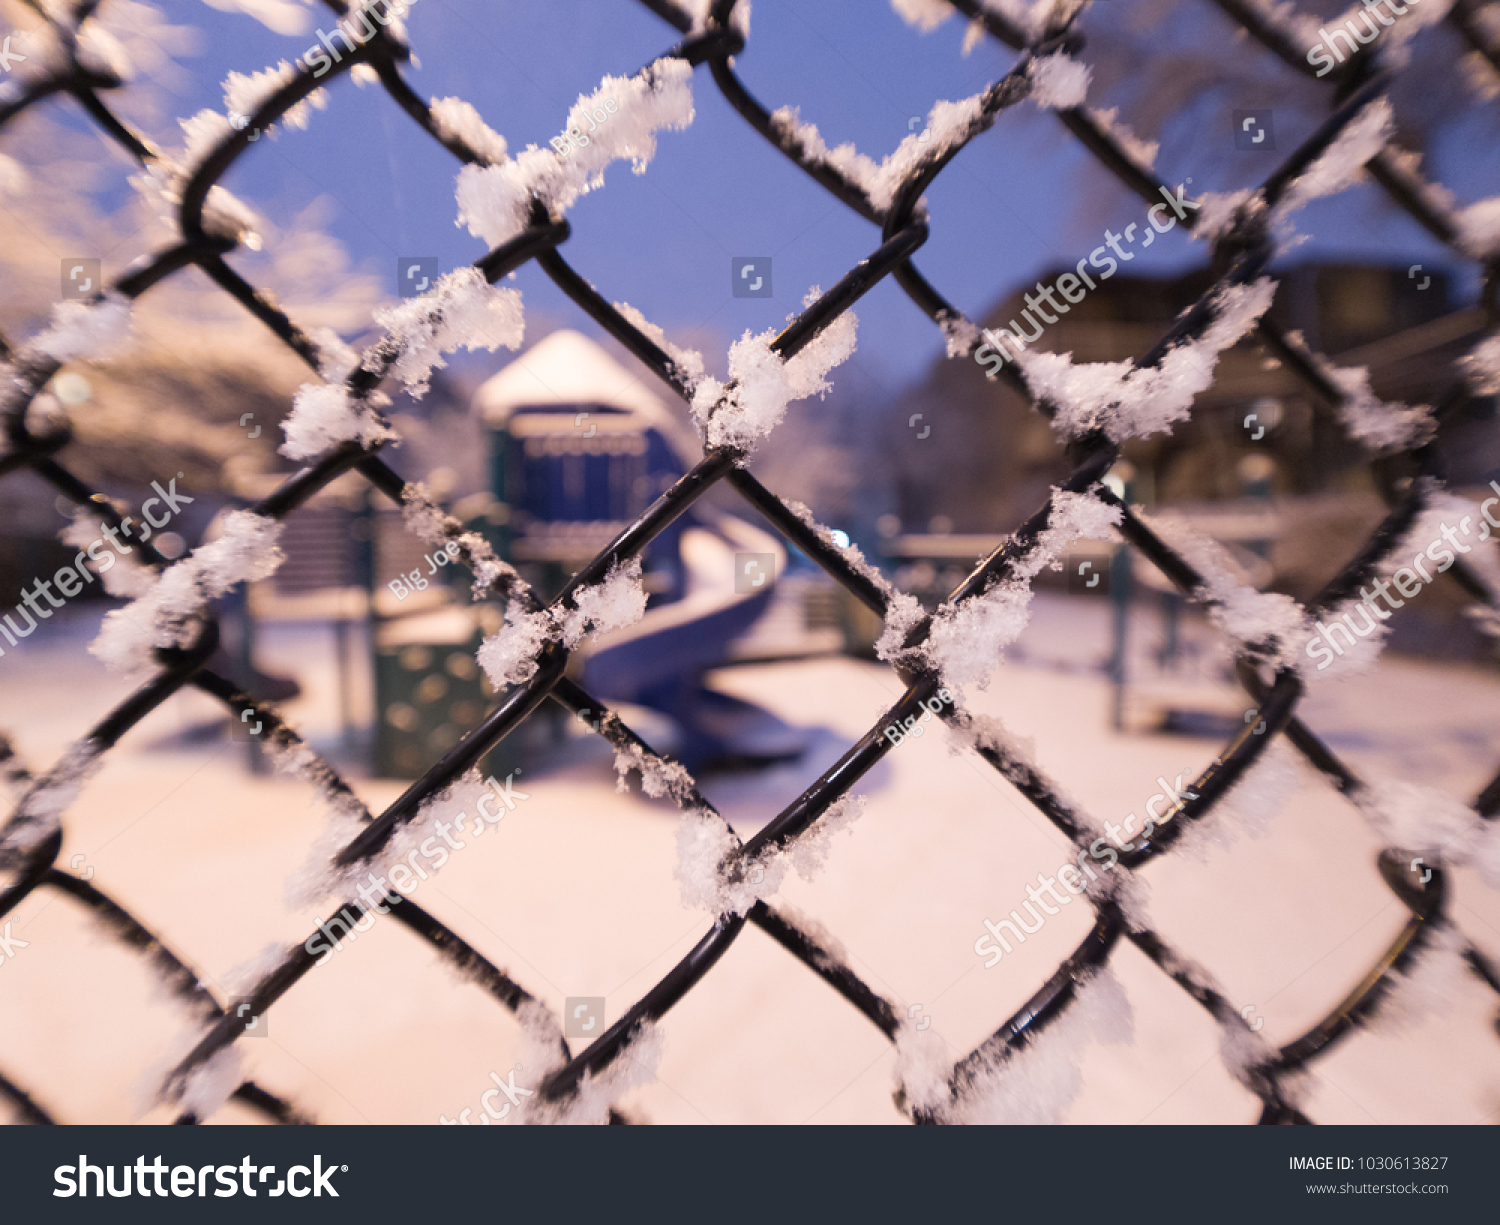 View looking through a snow covered chain link fence to a playground slide on a cold quiet evening in winter in Chicago with blue sky beyond. #1030613827